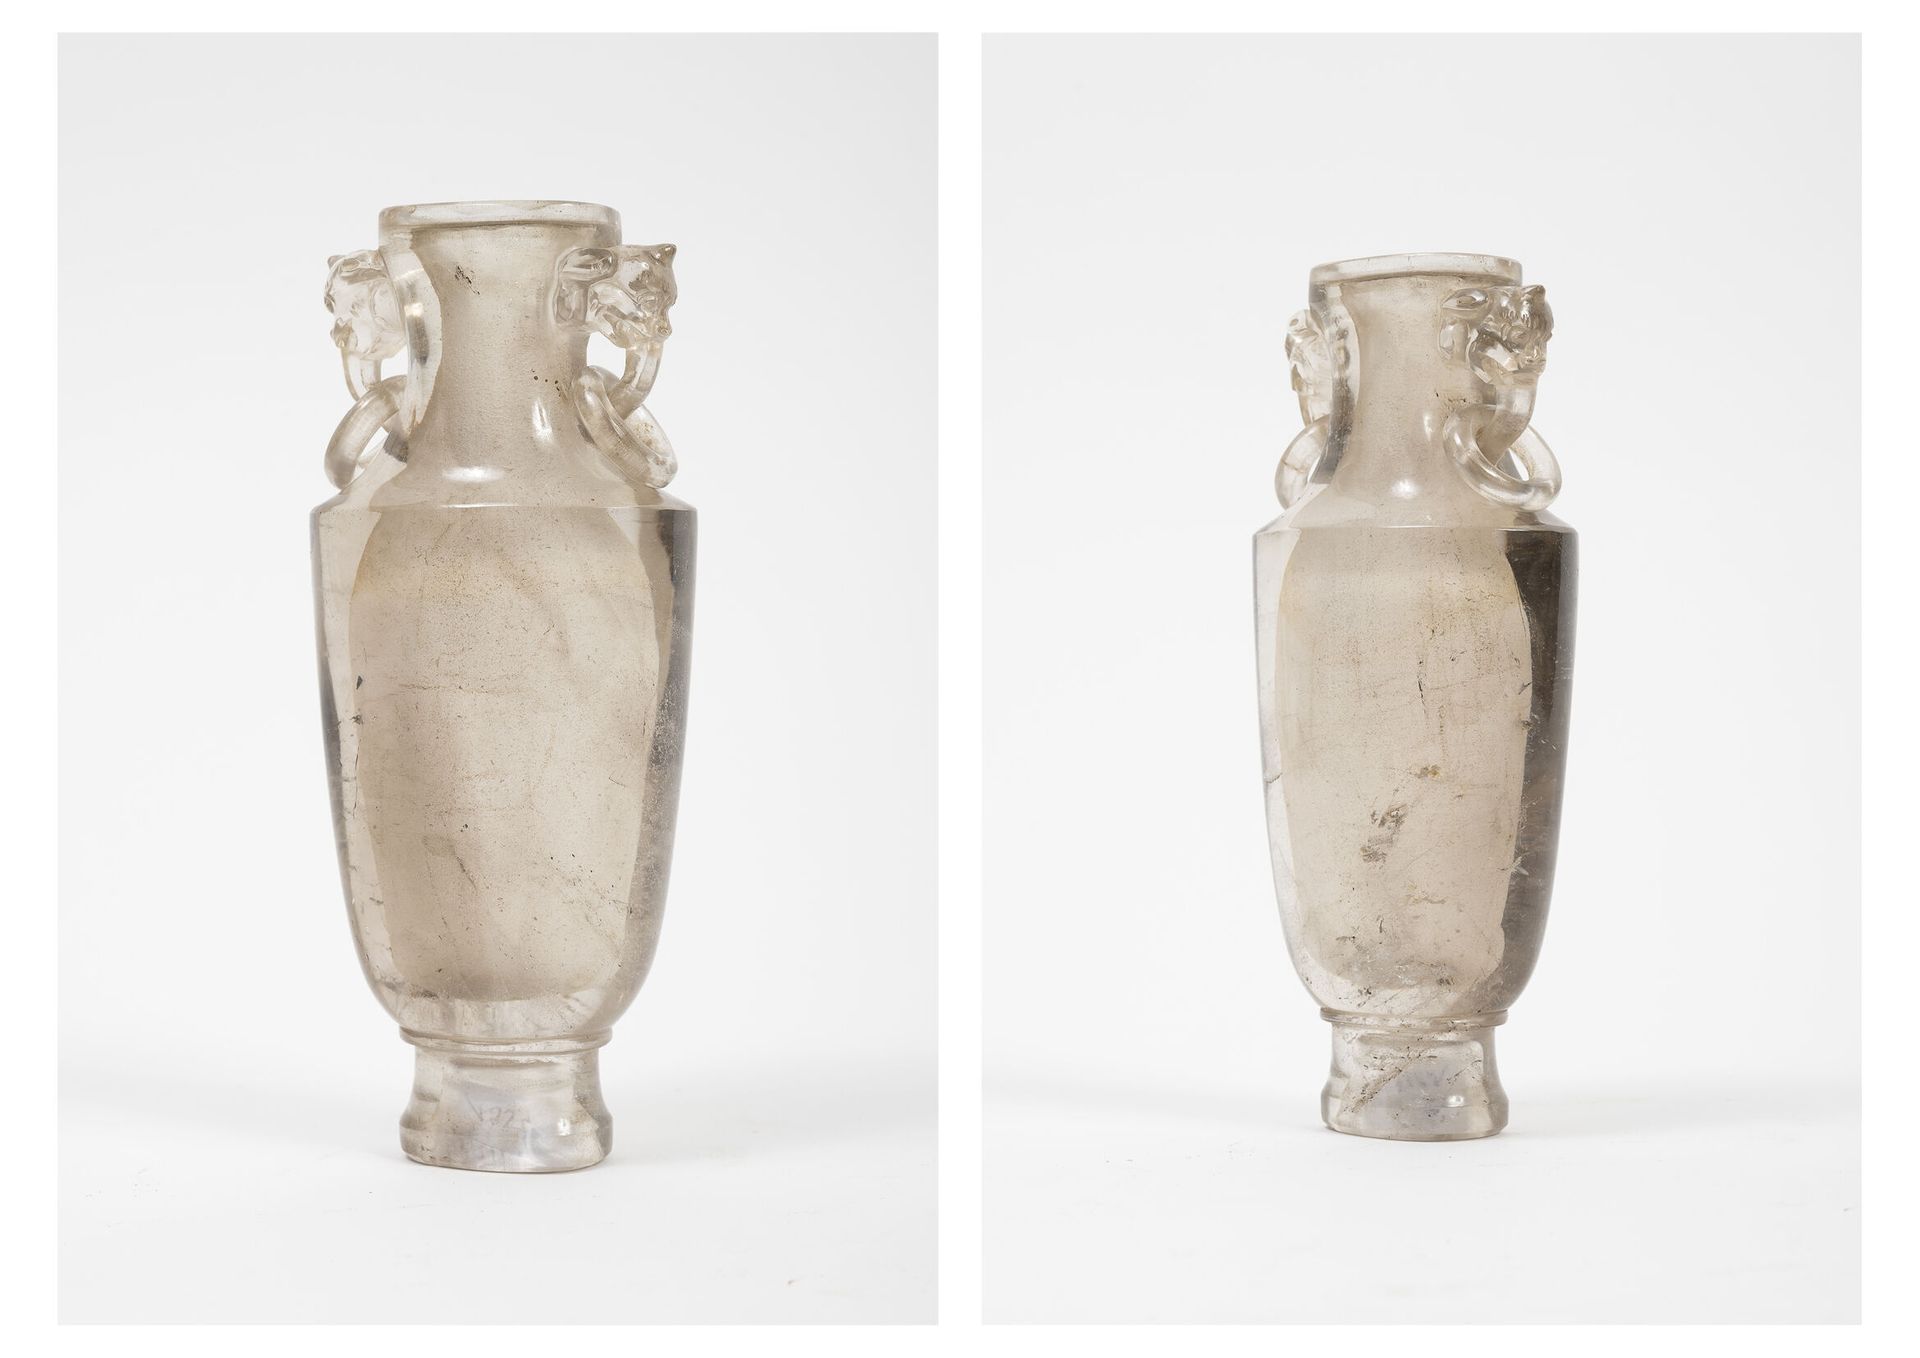 CHINE, XXème siècle A small rock crystal vase with a flattened body on a high he&hellip;